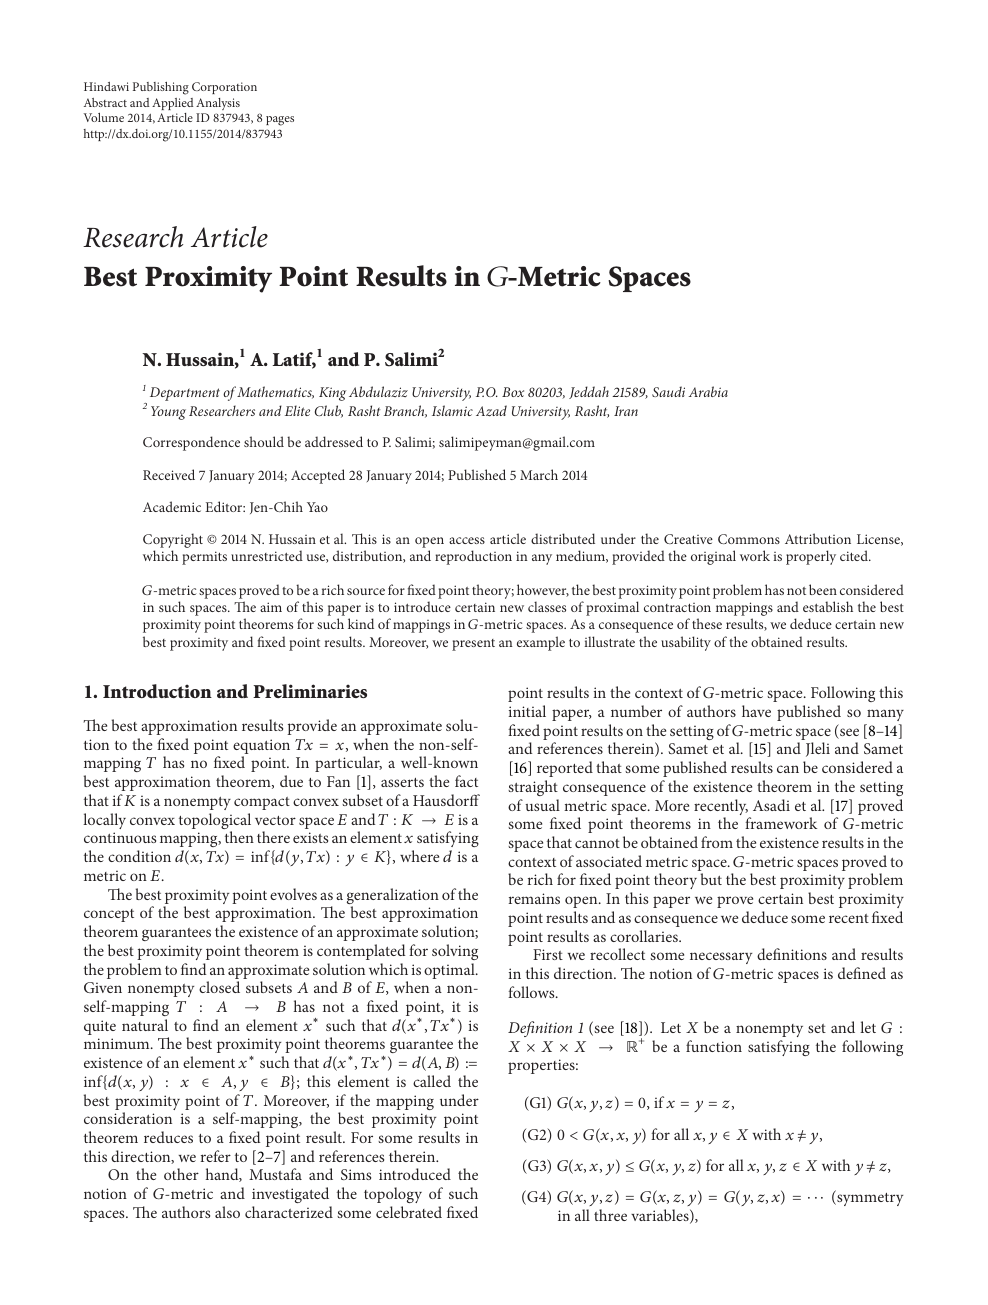 Best Proximity Point Results In Metric Spaces Topic Of Research Paper In Mathematics Download Scholarly Article Pdf And Read For Free On Cyberleninka Open Science Hub